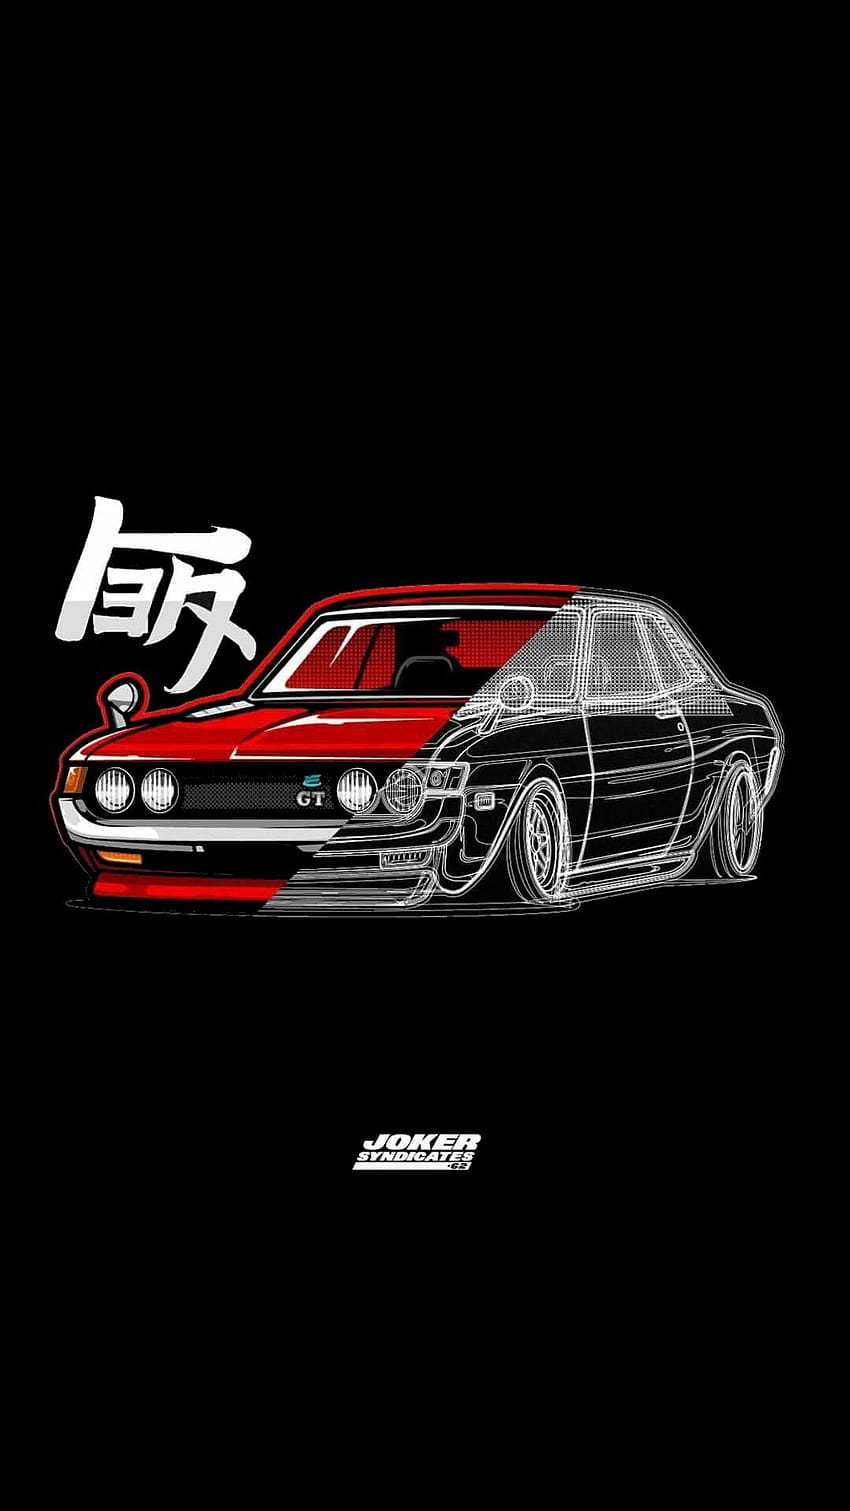 Japanese Cars posted by Zoey Sellers, aesthetic 90s jdm car HD phone wallpaper